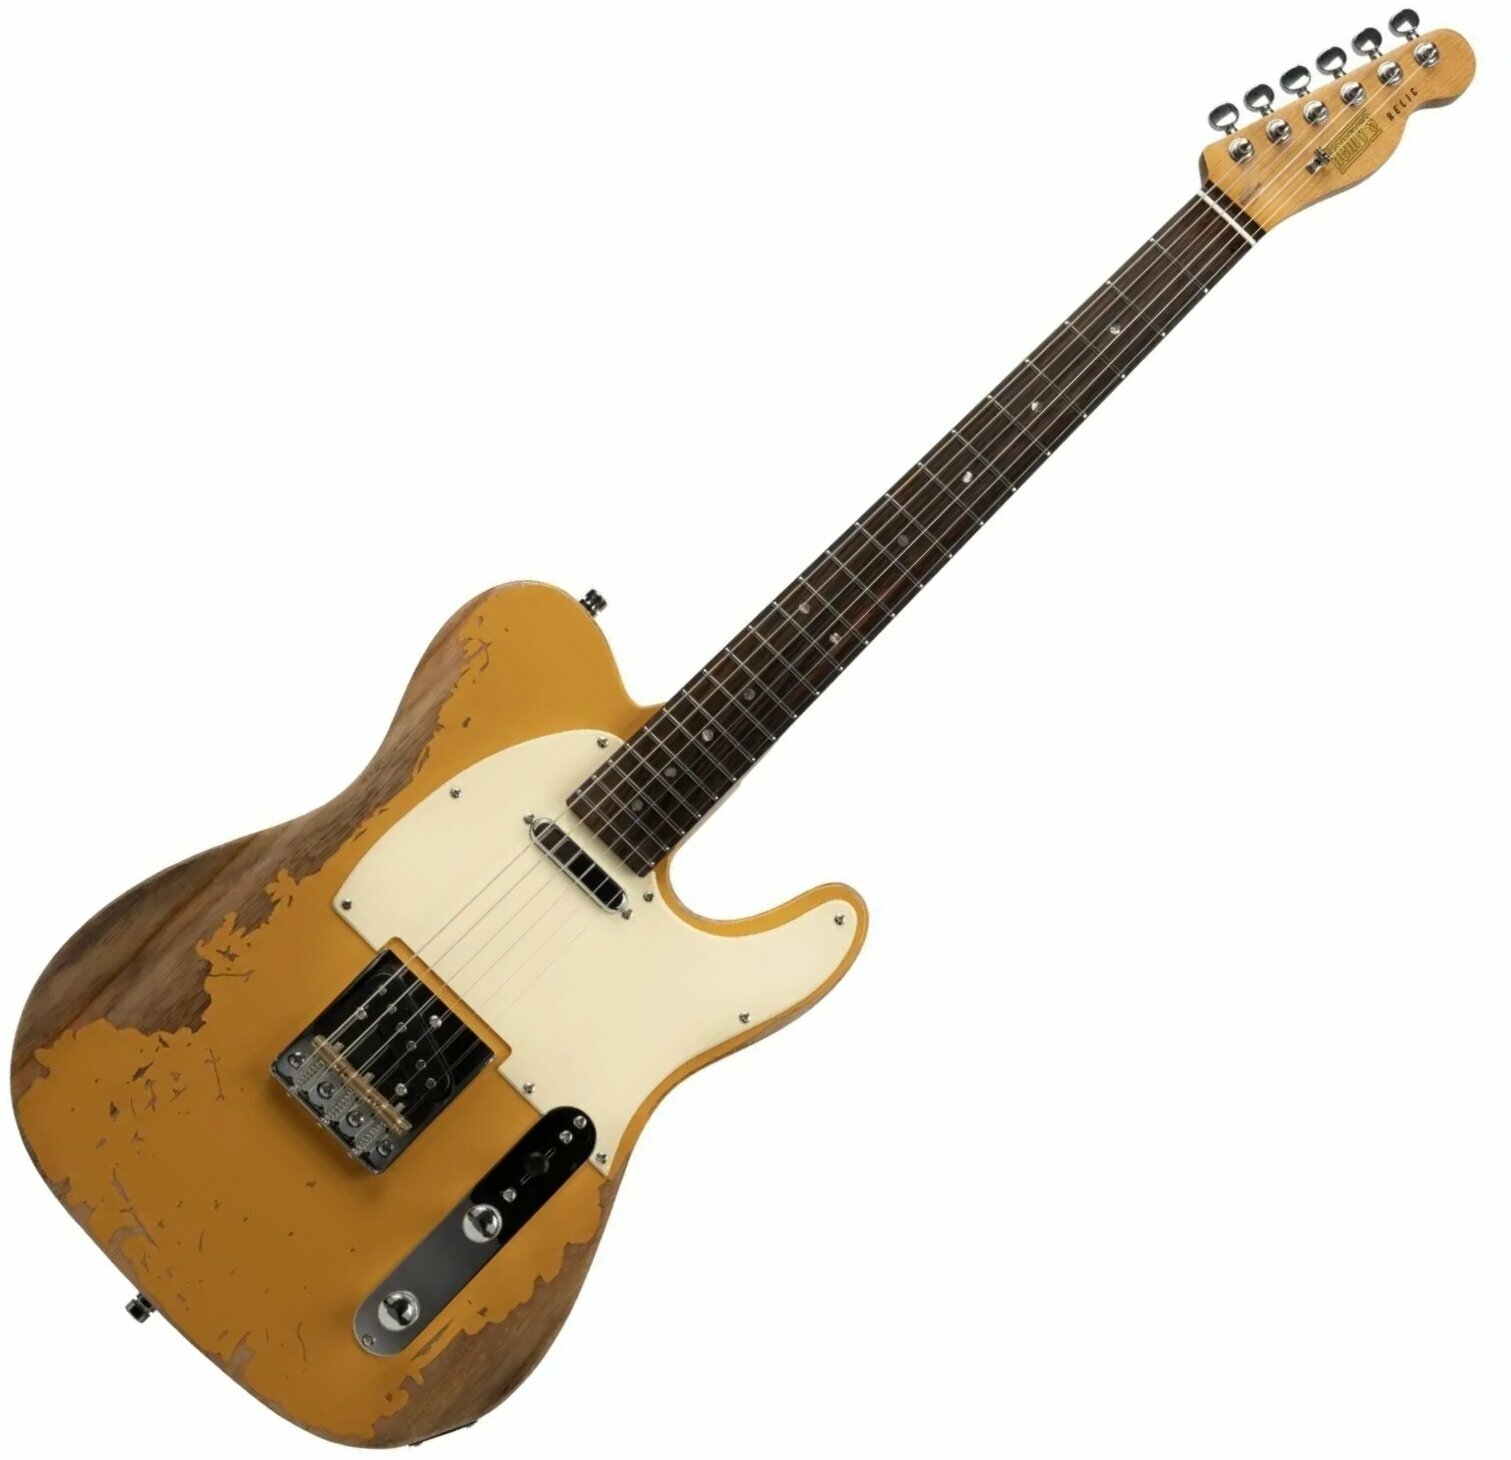 Electric guitar Henry's TL-1 The Comet Yellow Relic